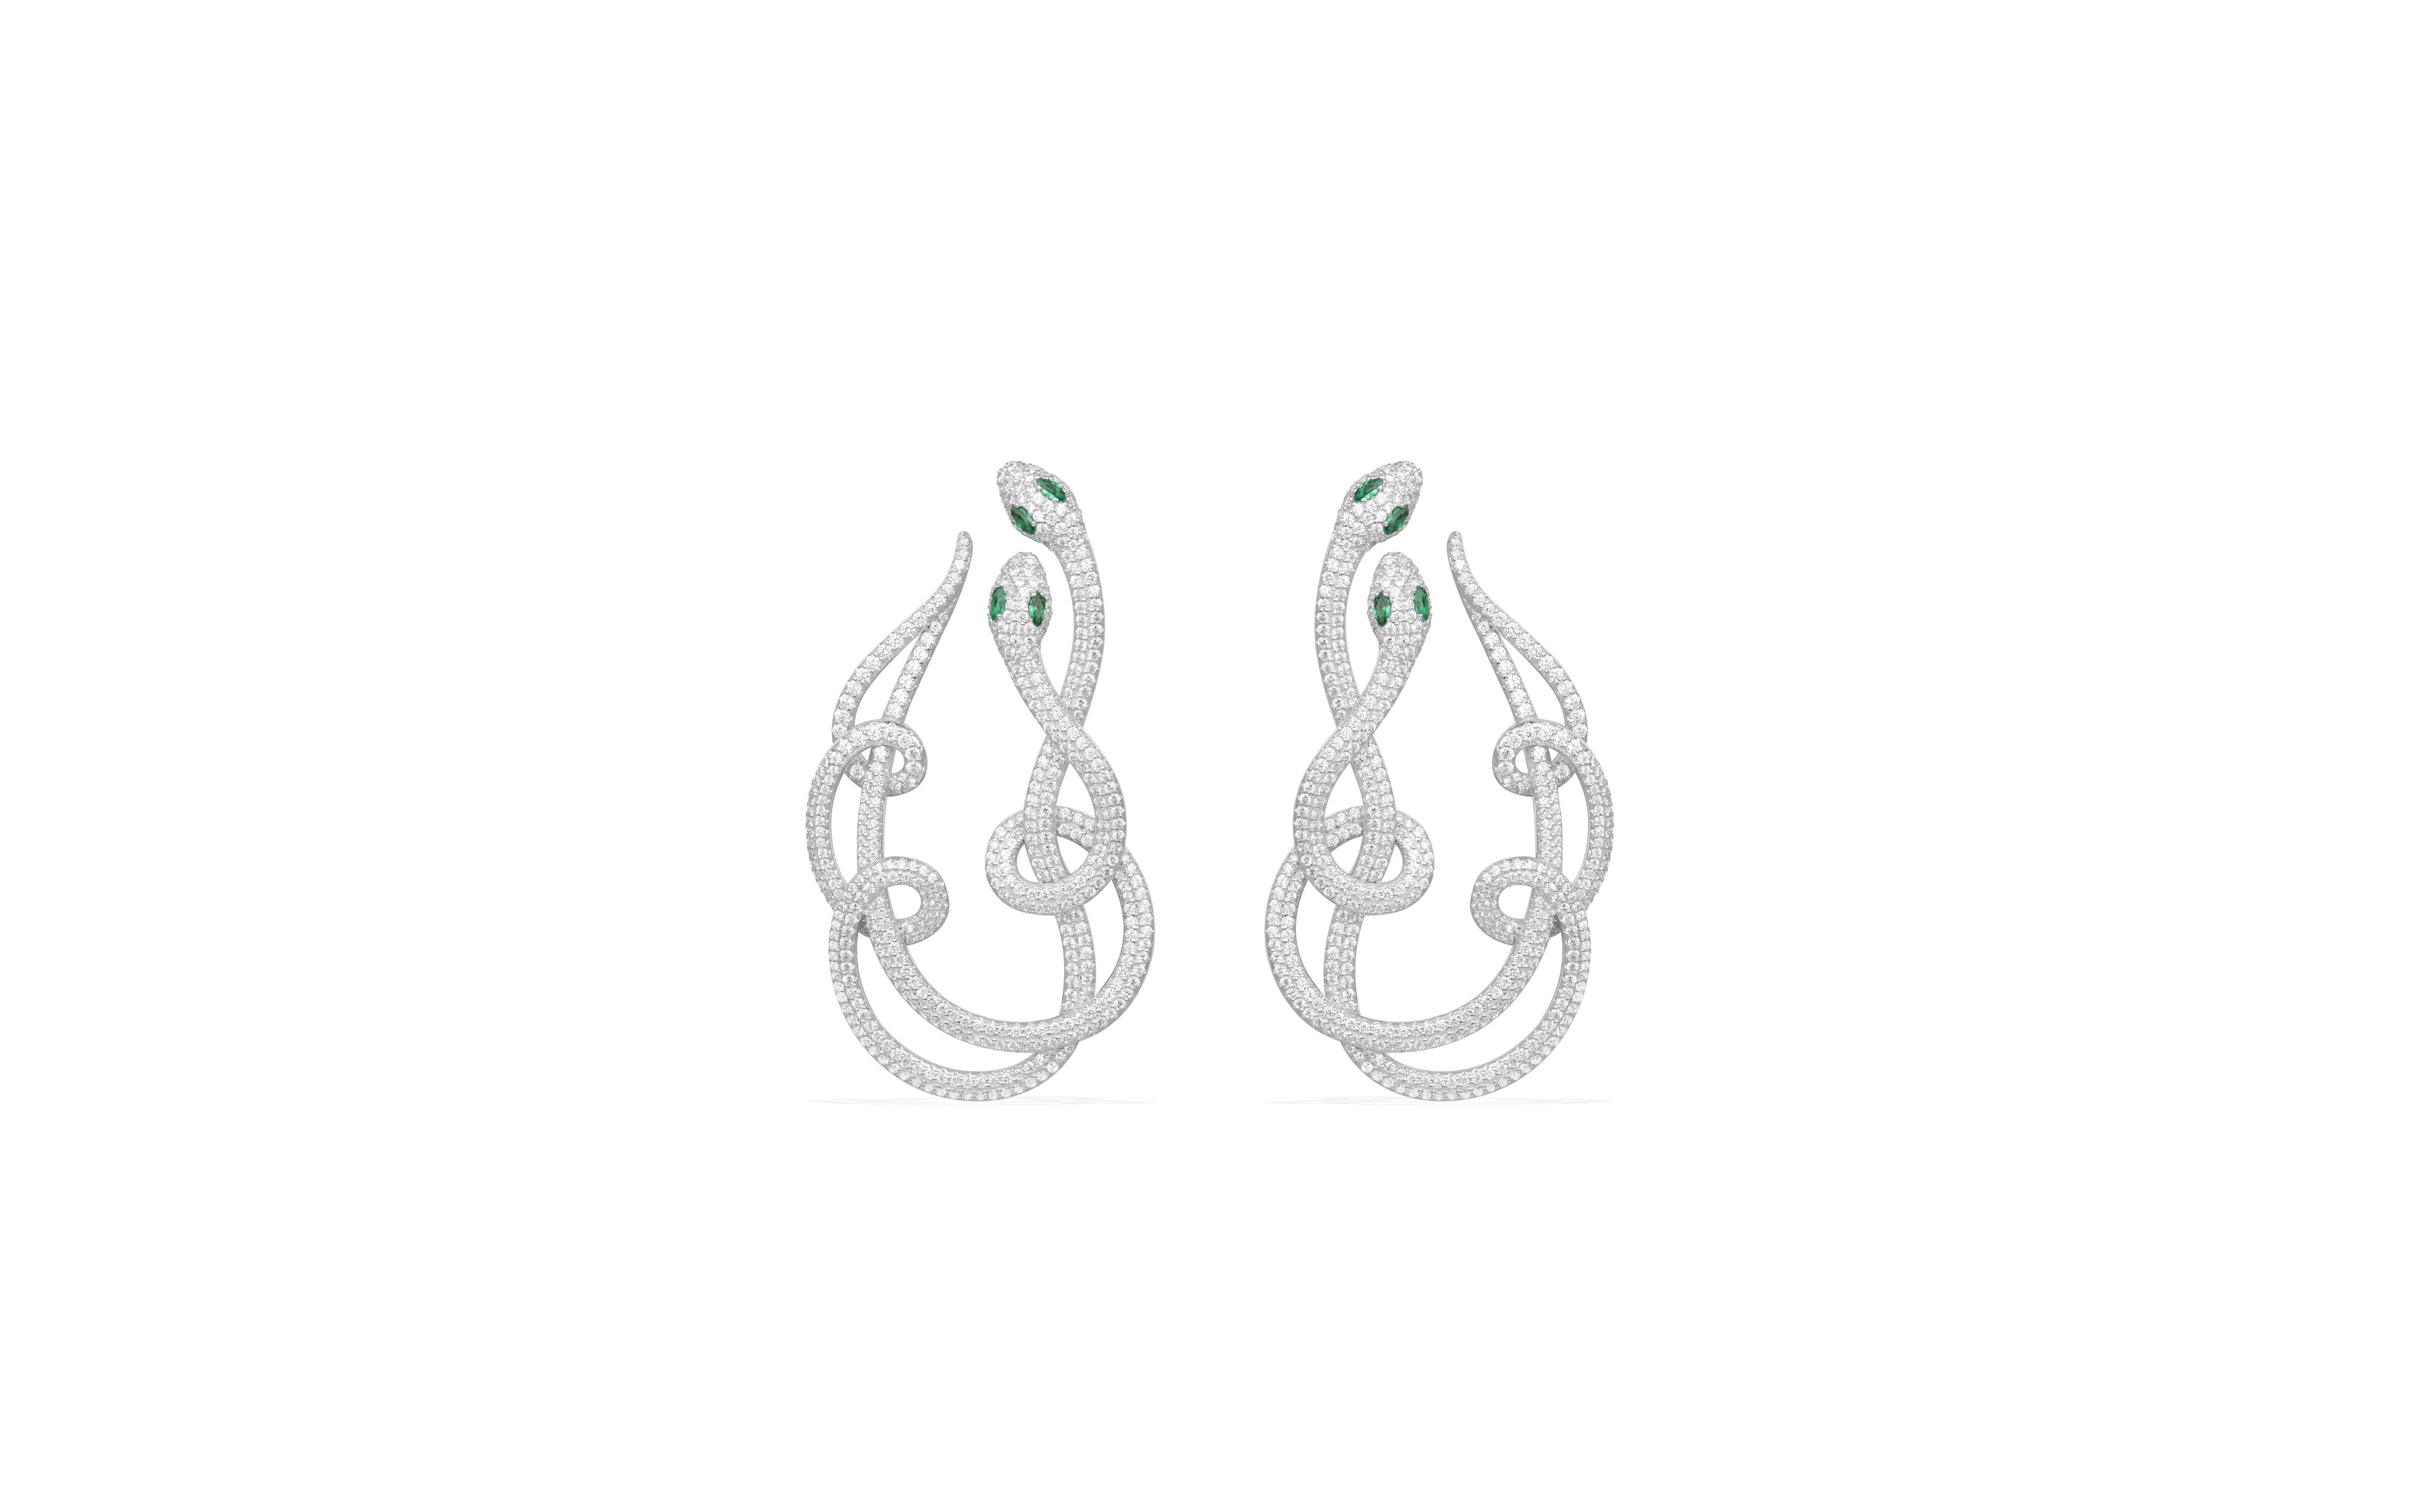 Make a statement with the serpentine earrings from APM Monaco and the embroidered dress by Needle & Thread